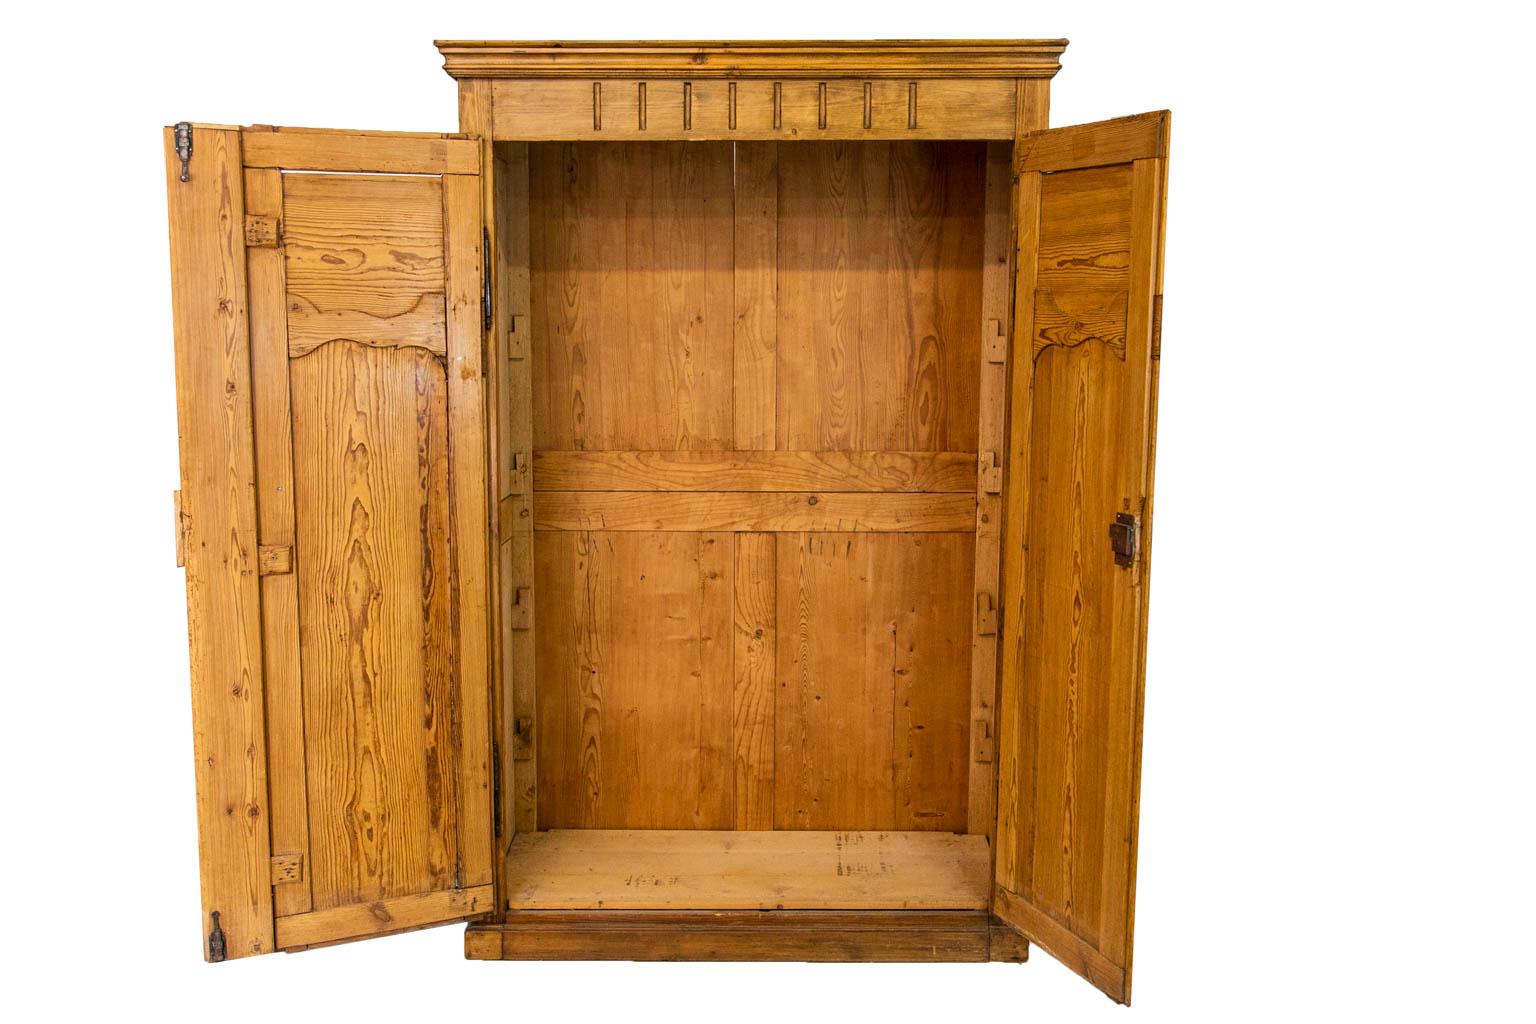 The frieze and center stile of this armoire are fluted. The doors are framed with shaped moldings and have raised panels that are also framed by shaped moldings. There are support structures for four shelves inside. Currently there are no shelves.